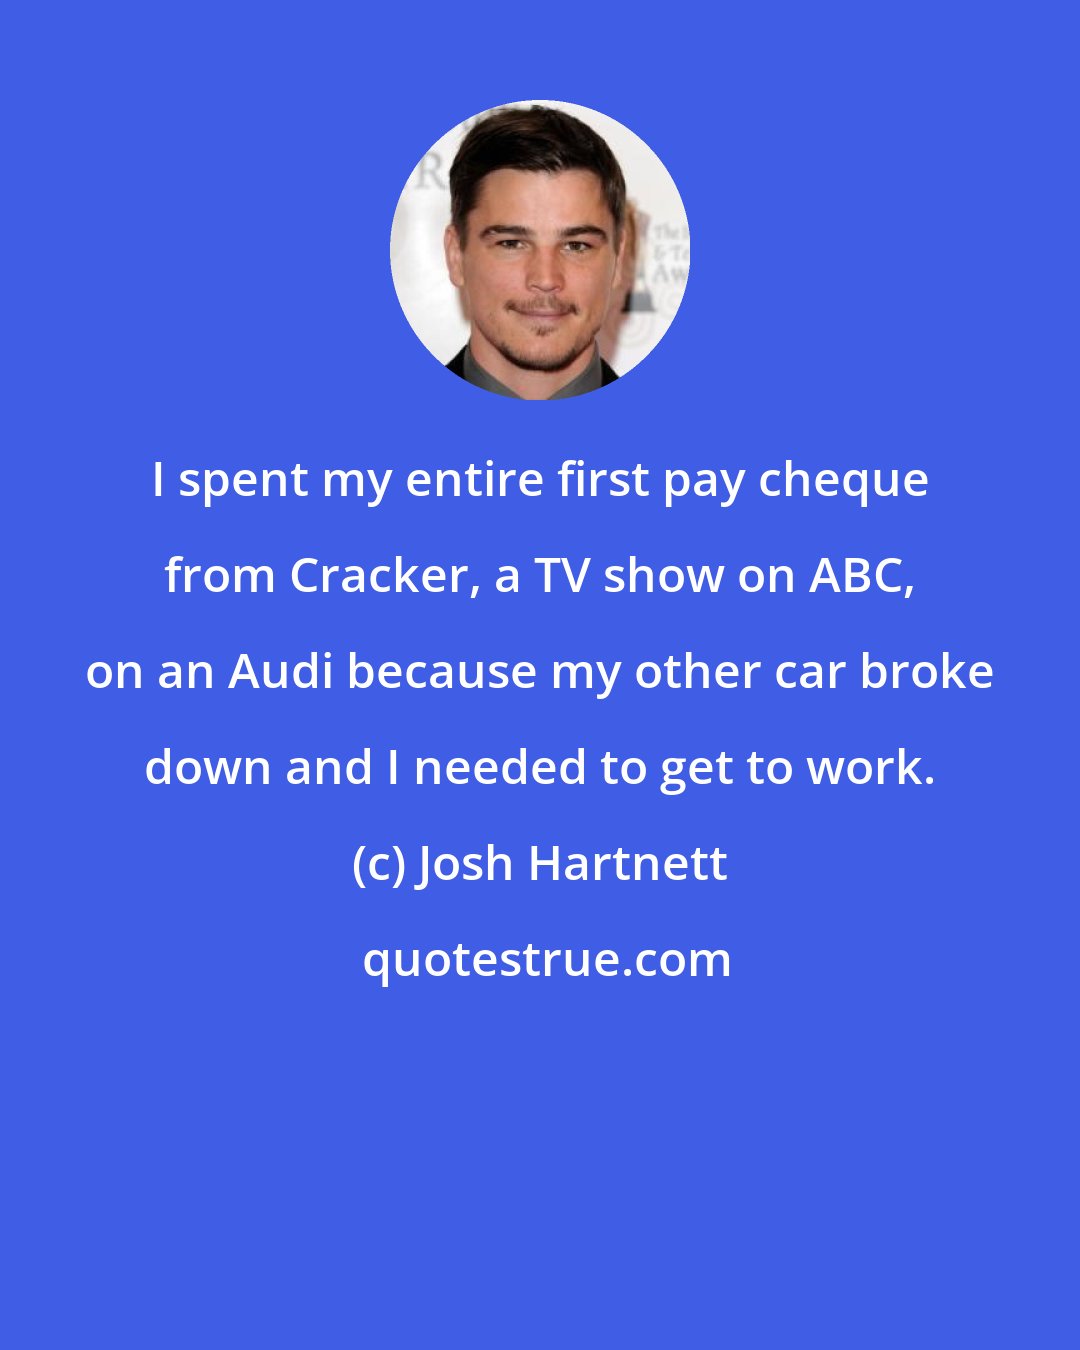 Josh Hartnett: I spent my entire first pay cheque from Cracker, a TV show on ABC, on an Audi because my other car broke down and I needed to get to work.